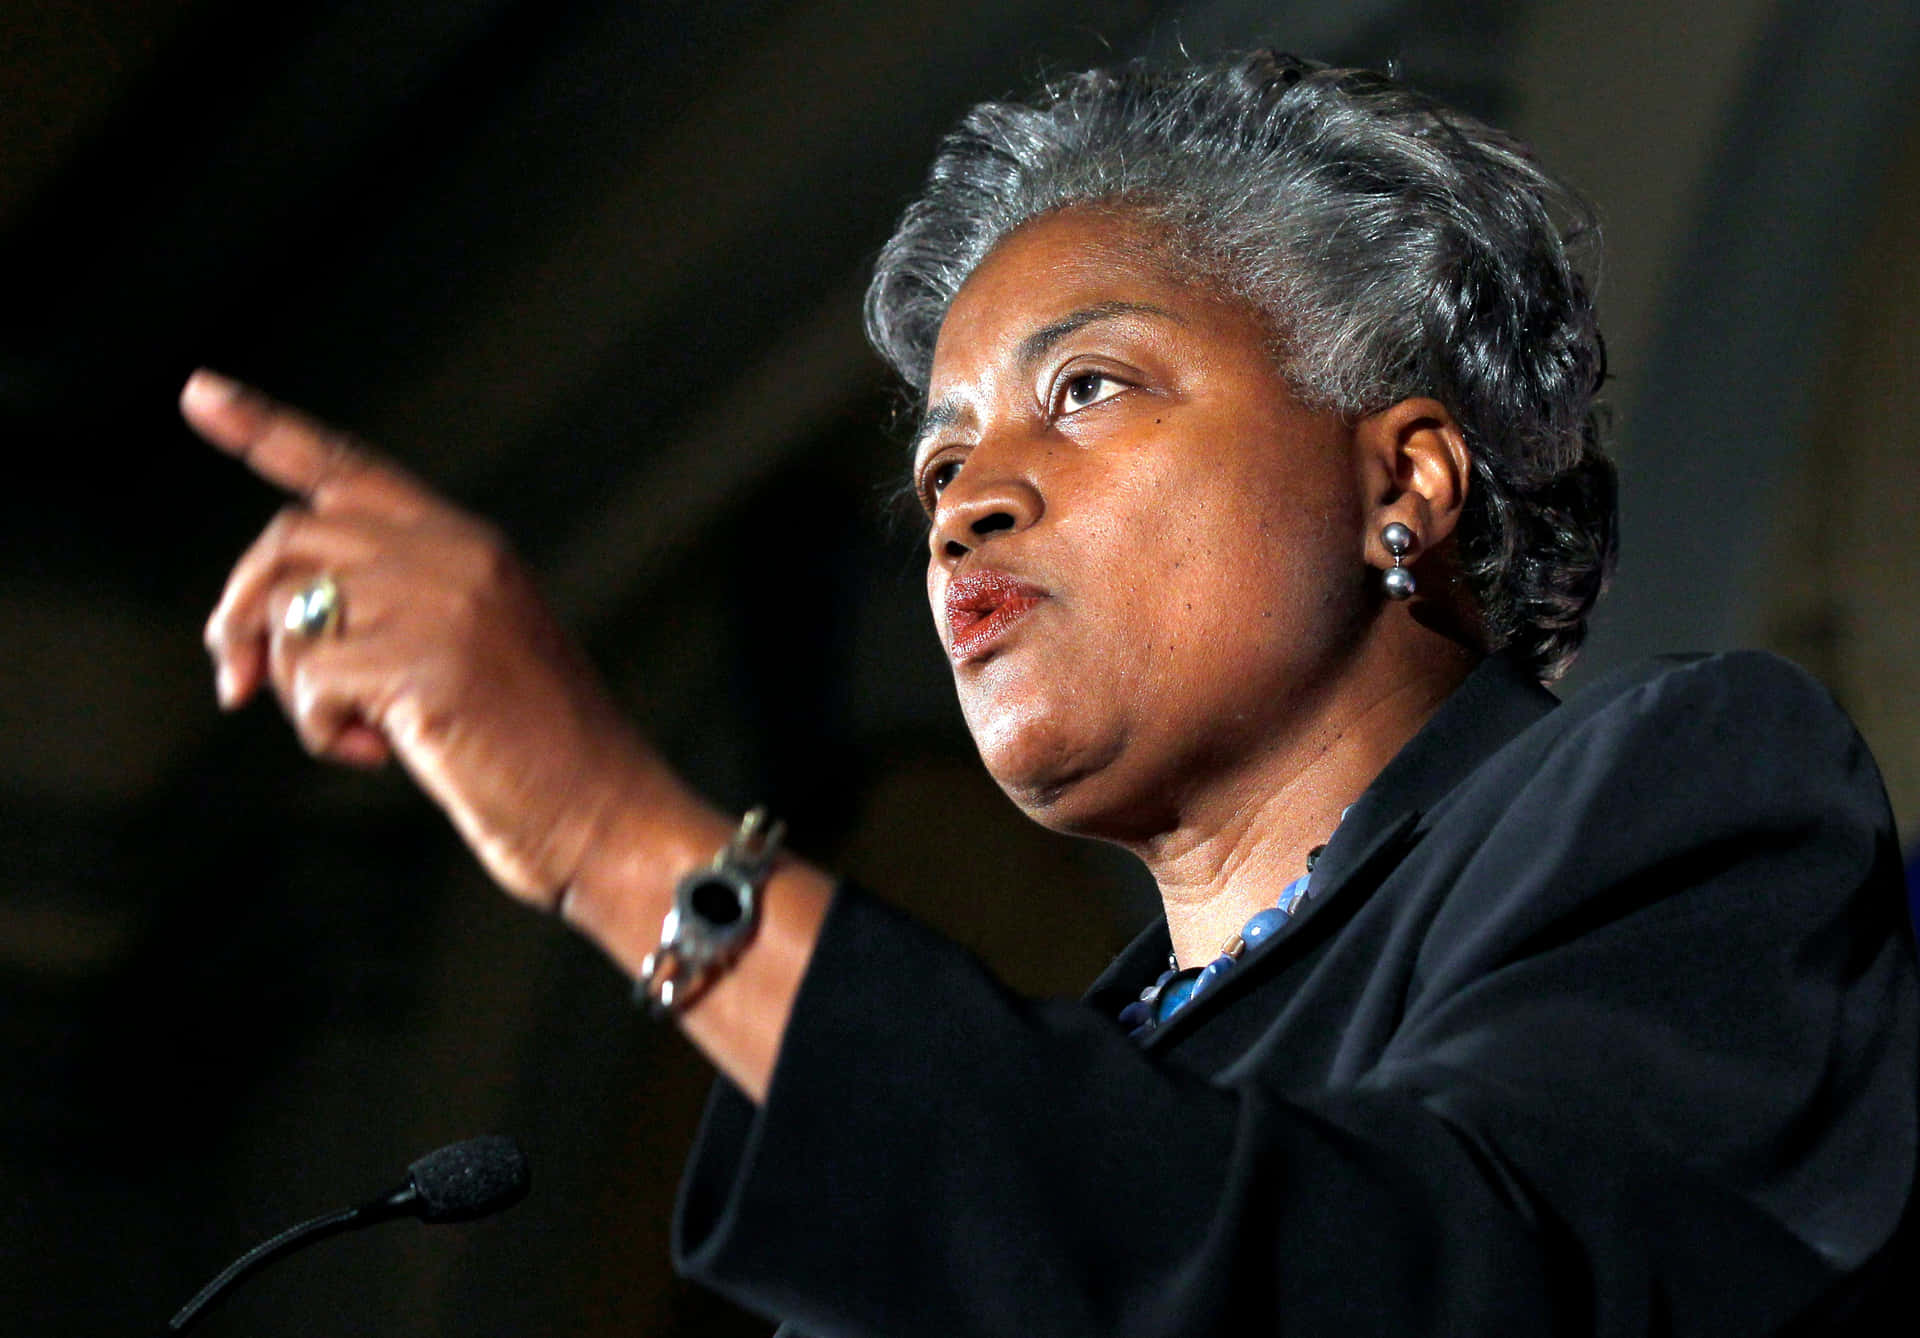 Donna Brazile Delivering A Speech At A Political Event Wallpaper